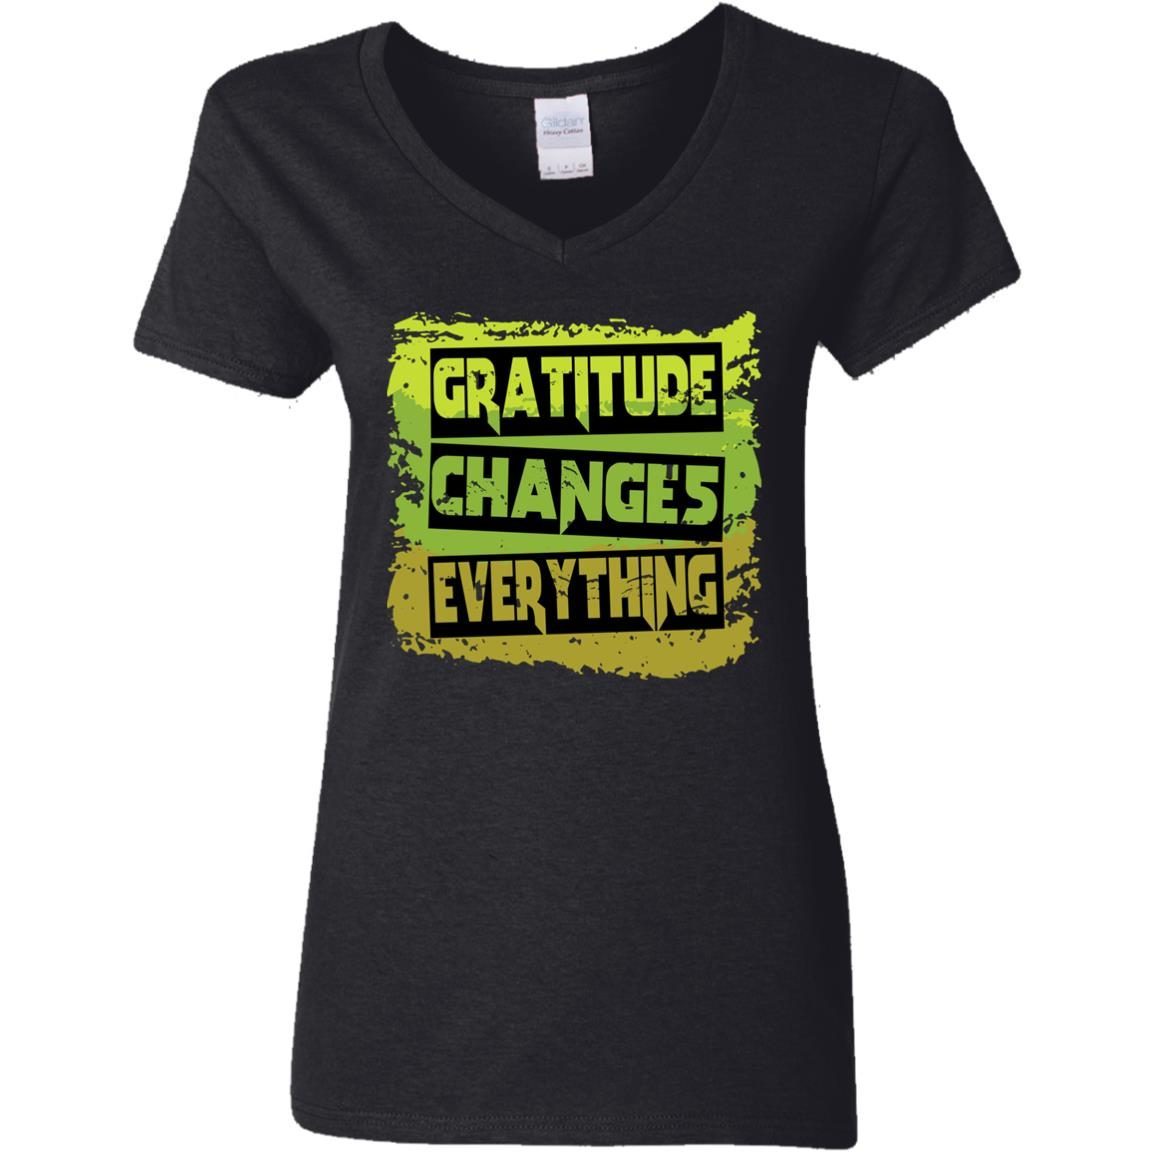 Gratitude Changes Everything Funny Quote shirt 6